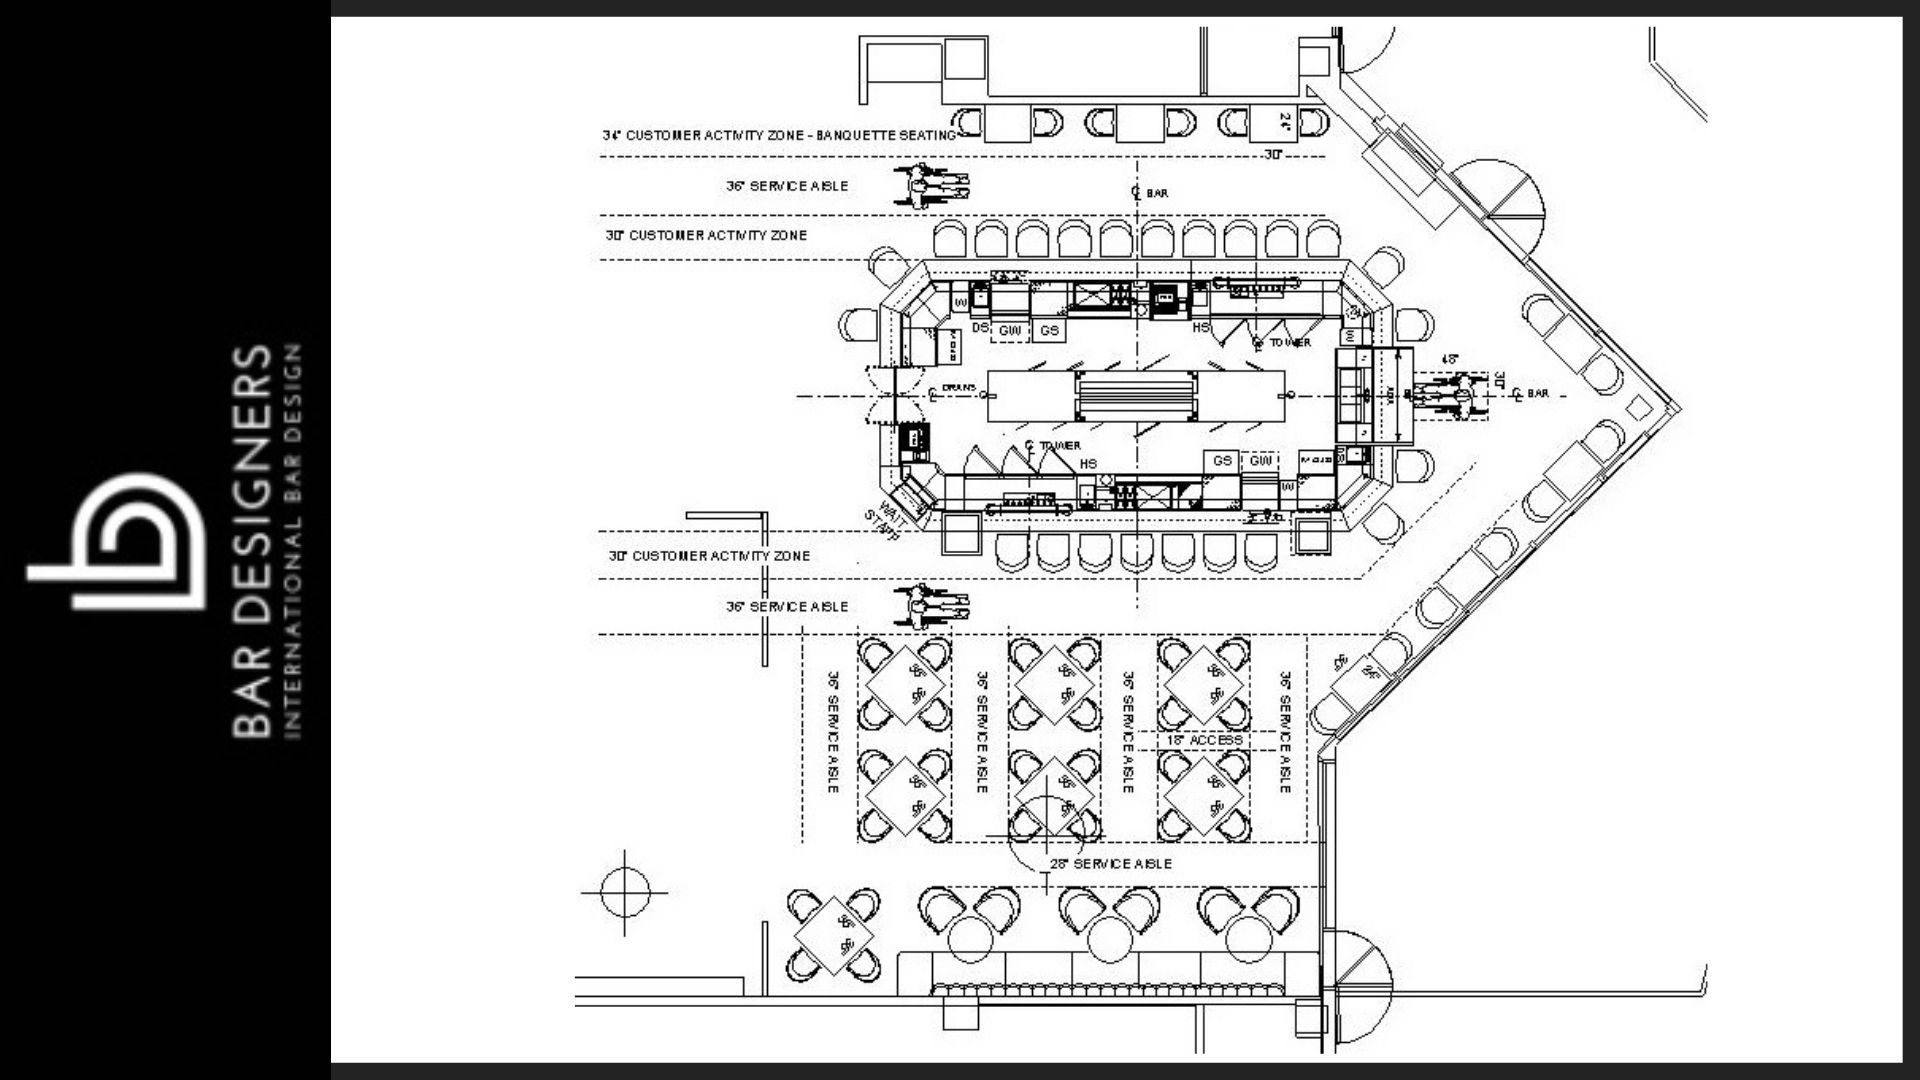 Architectural plan of island bar and restaurant seating clearances